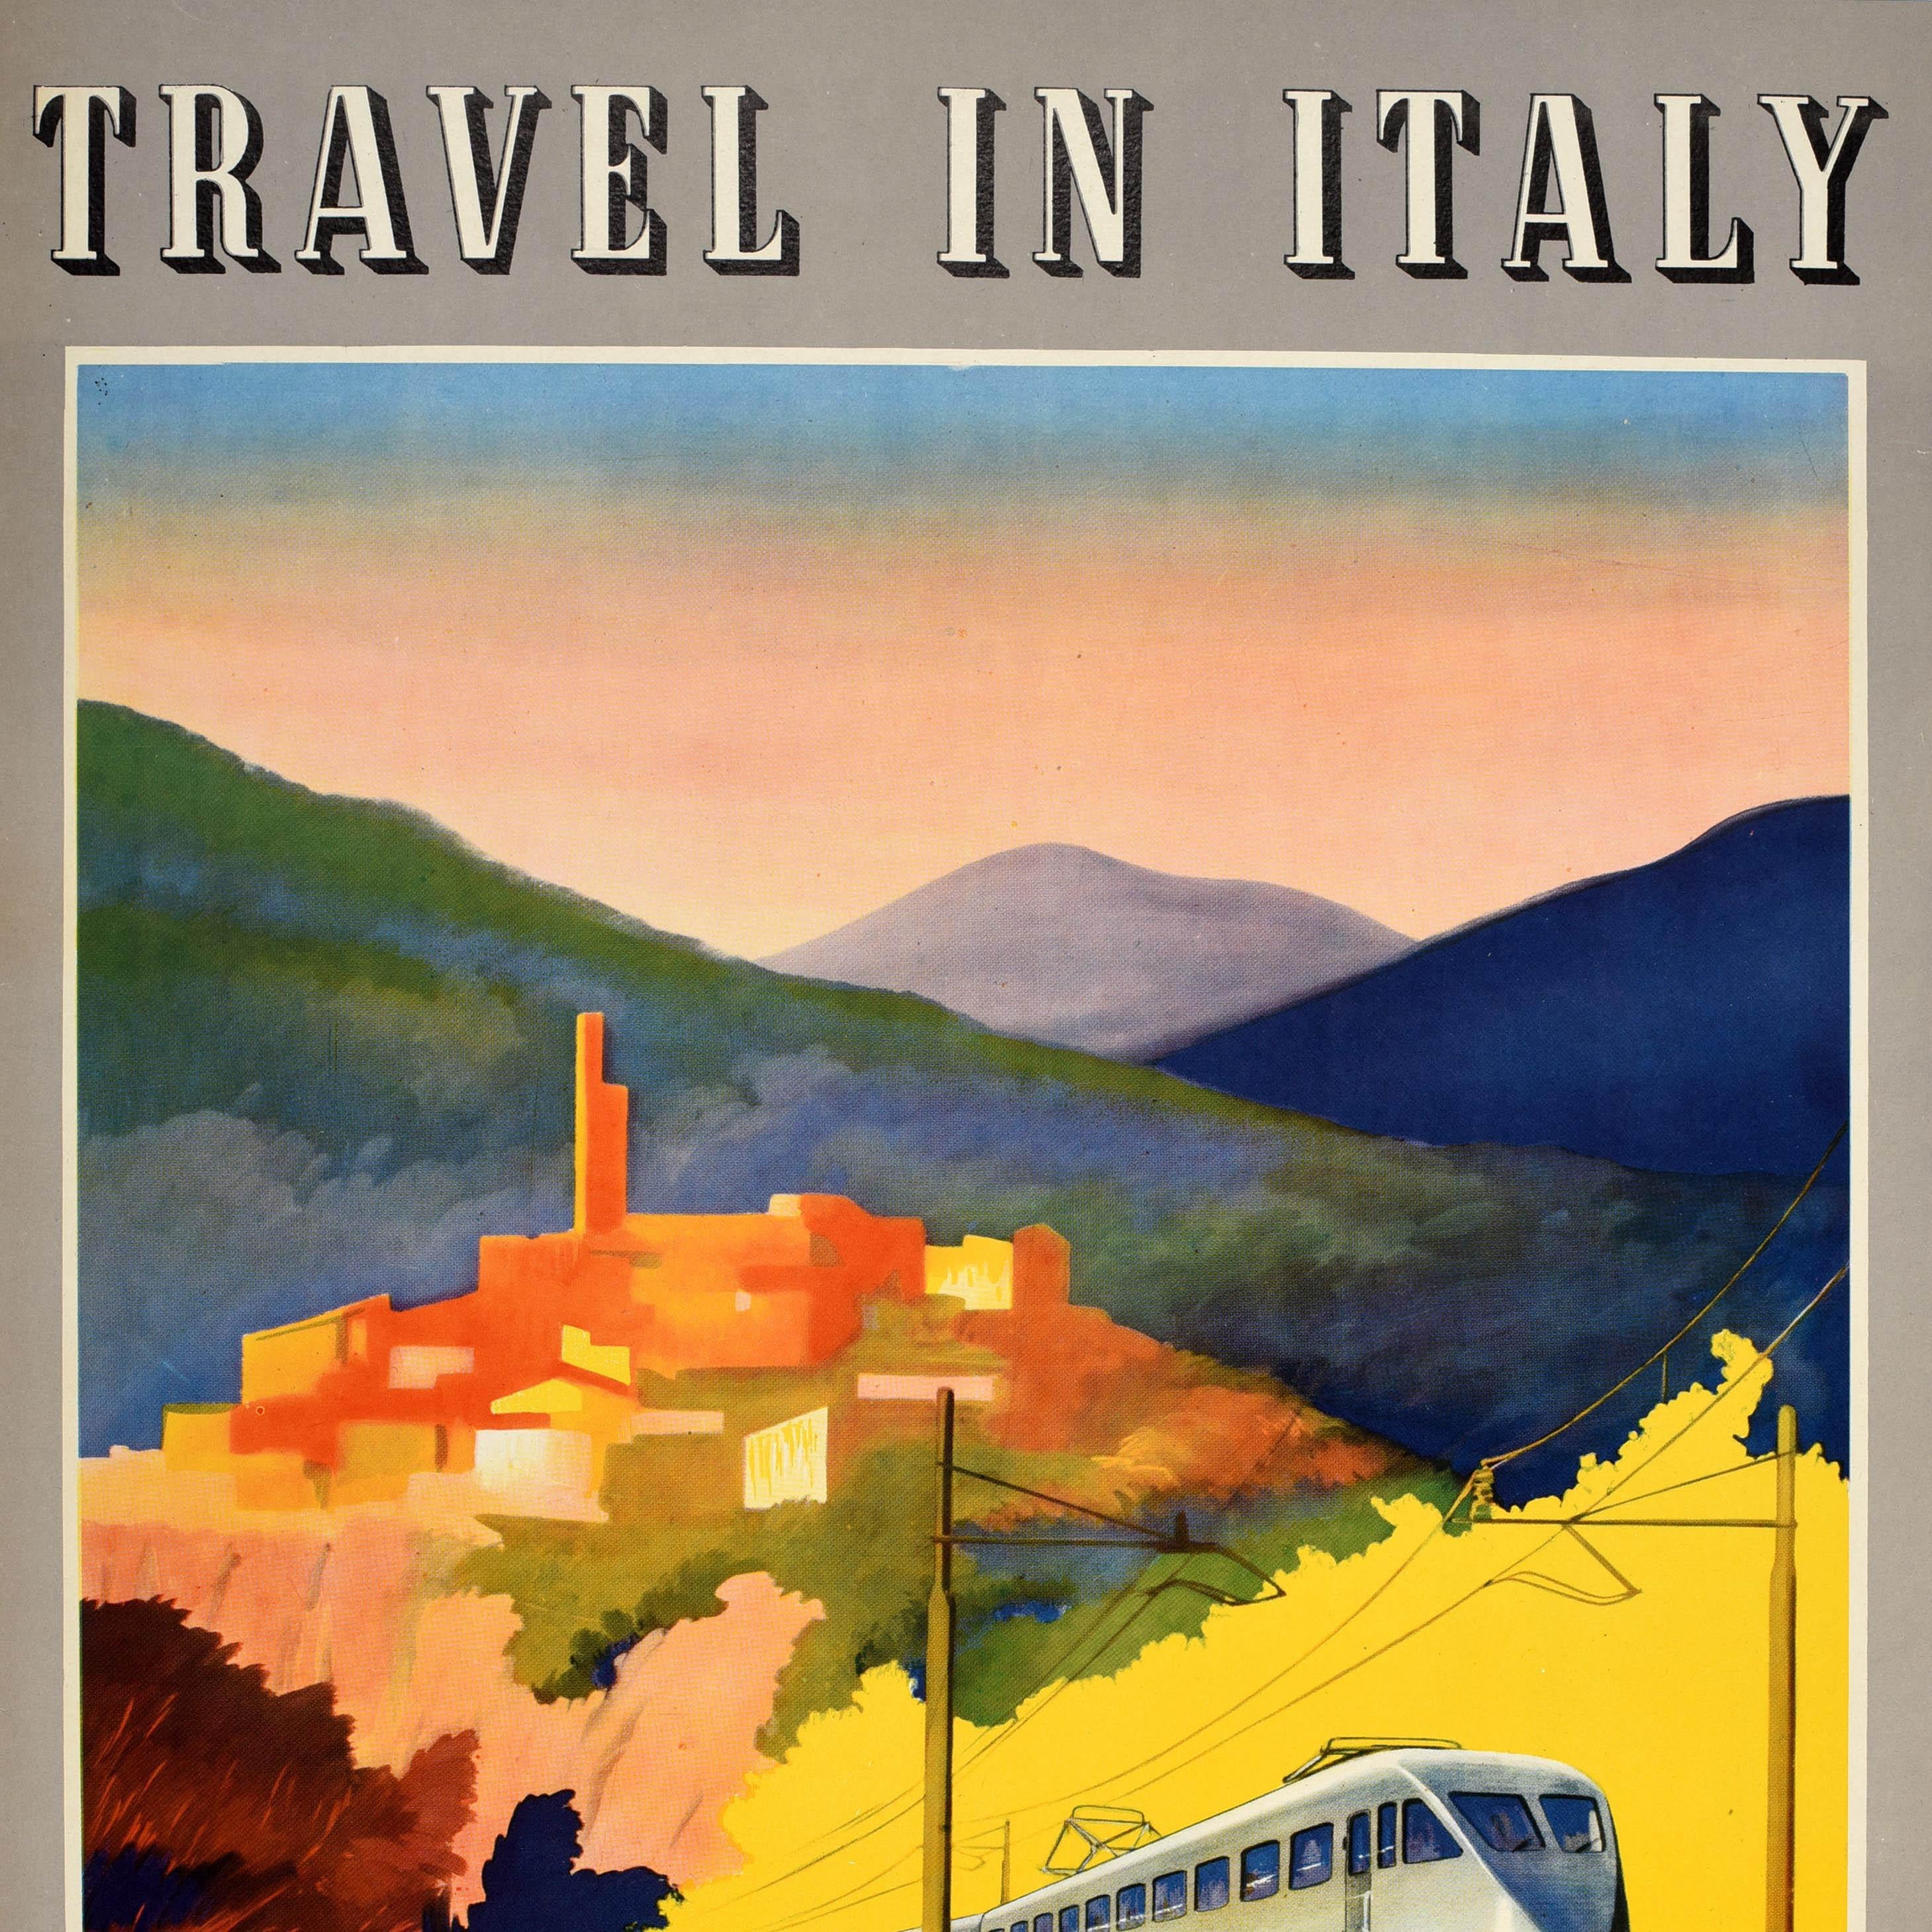 Original vintage poster - Travel in Italy The Railways Function Again - featuring colourful artwork depicting a sleek electric train traveling through the Italian countryside with a town on a hill and mountains in the background. Issued by the